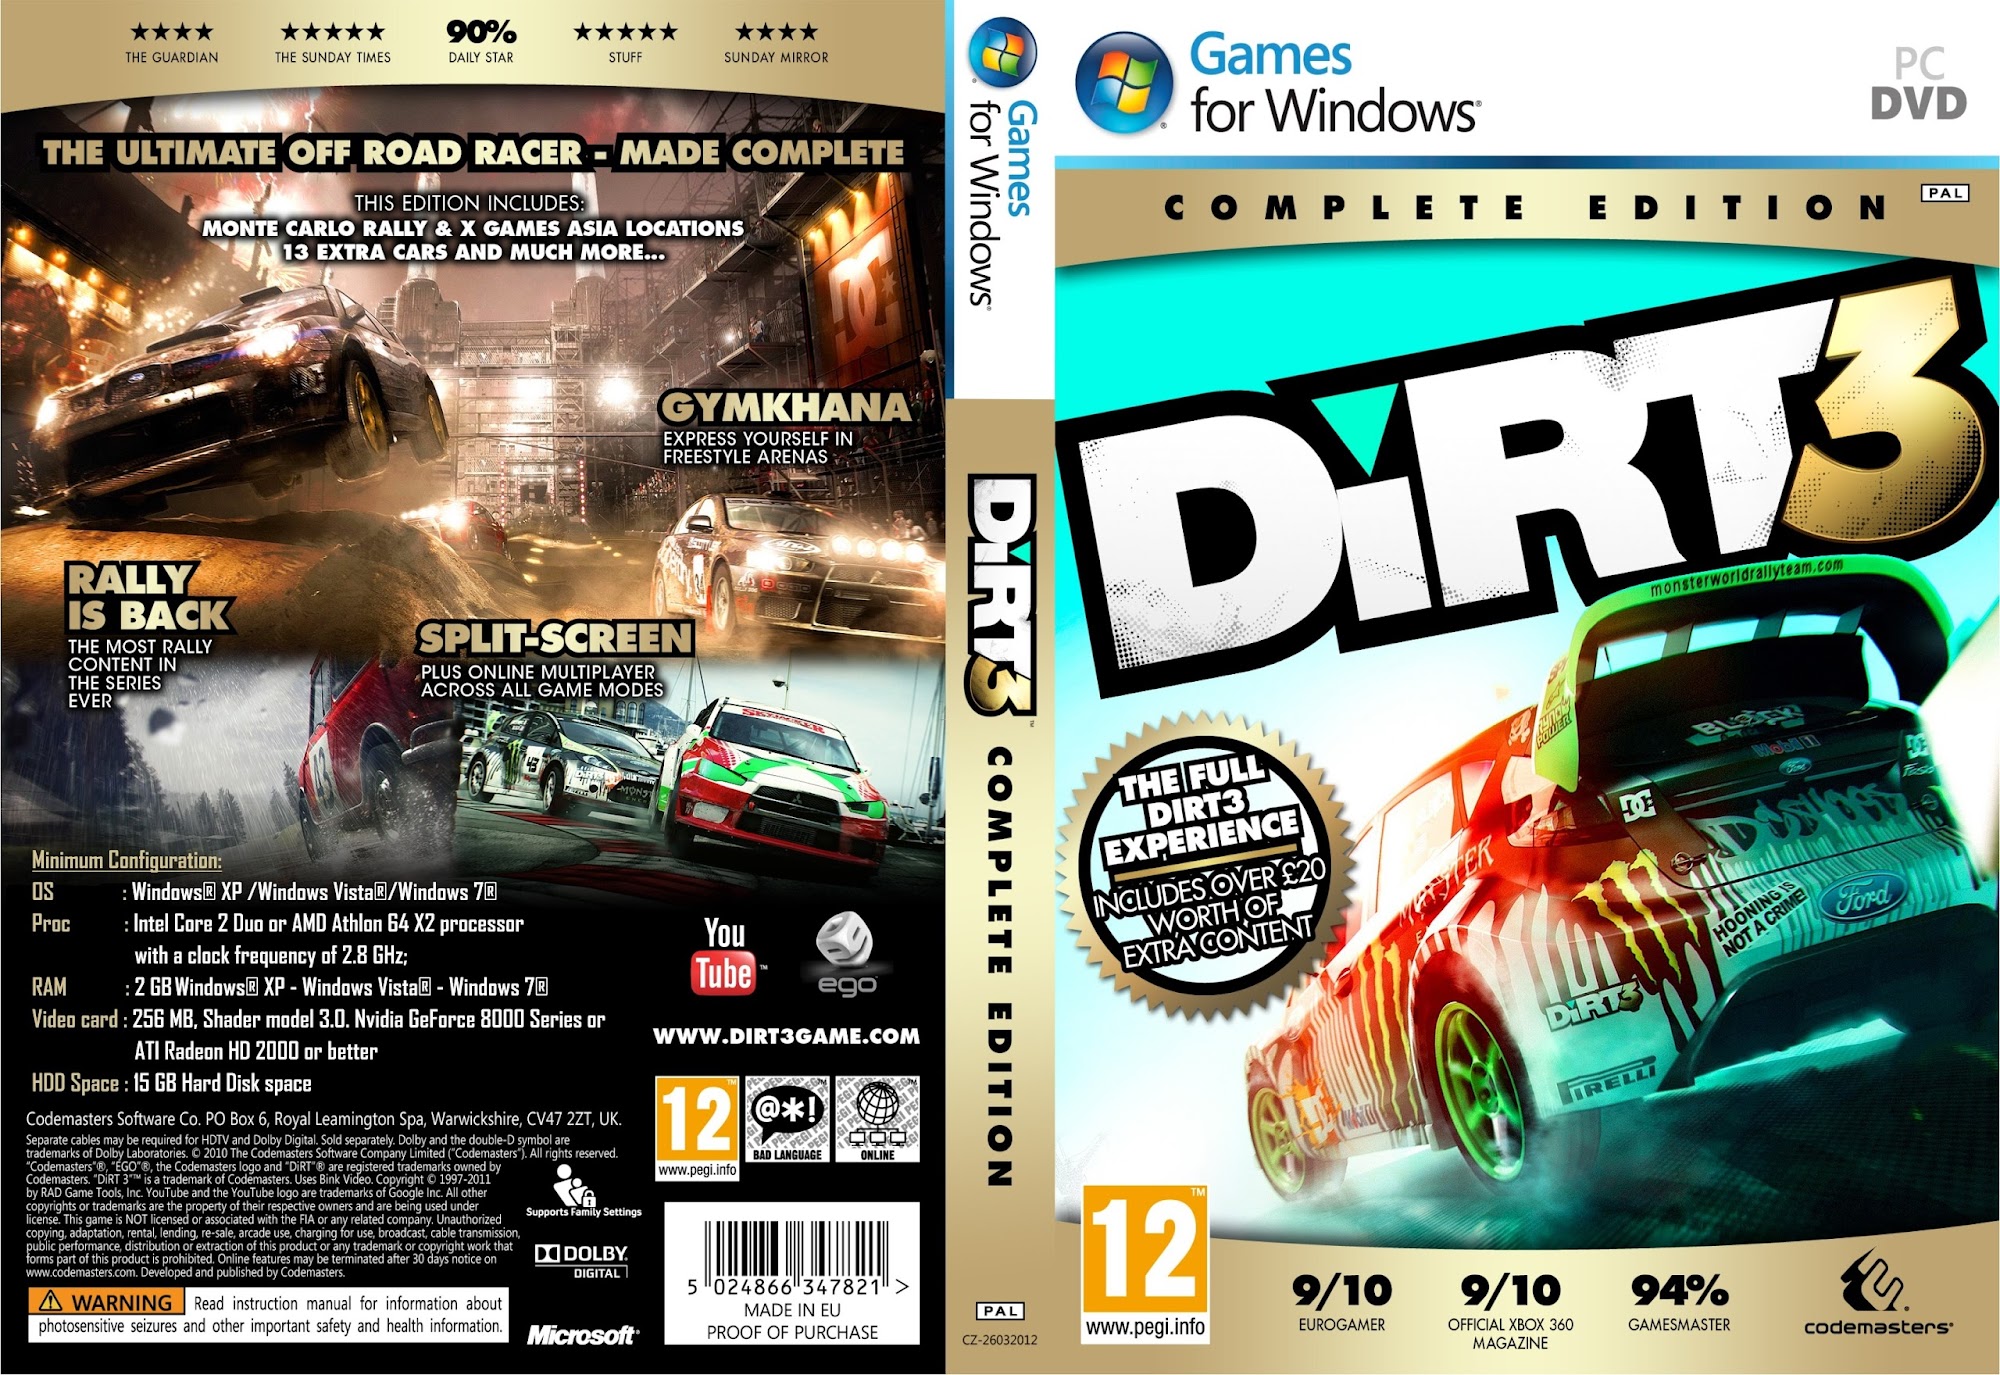 Complete edition game. Dirt 3 complete Edition обложка. Dirt 3 Xbox 360 обложка. Dirt 2 Xbox 360 обложка диска. Dirt Rally PC диск.